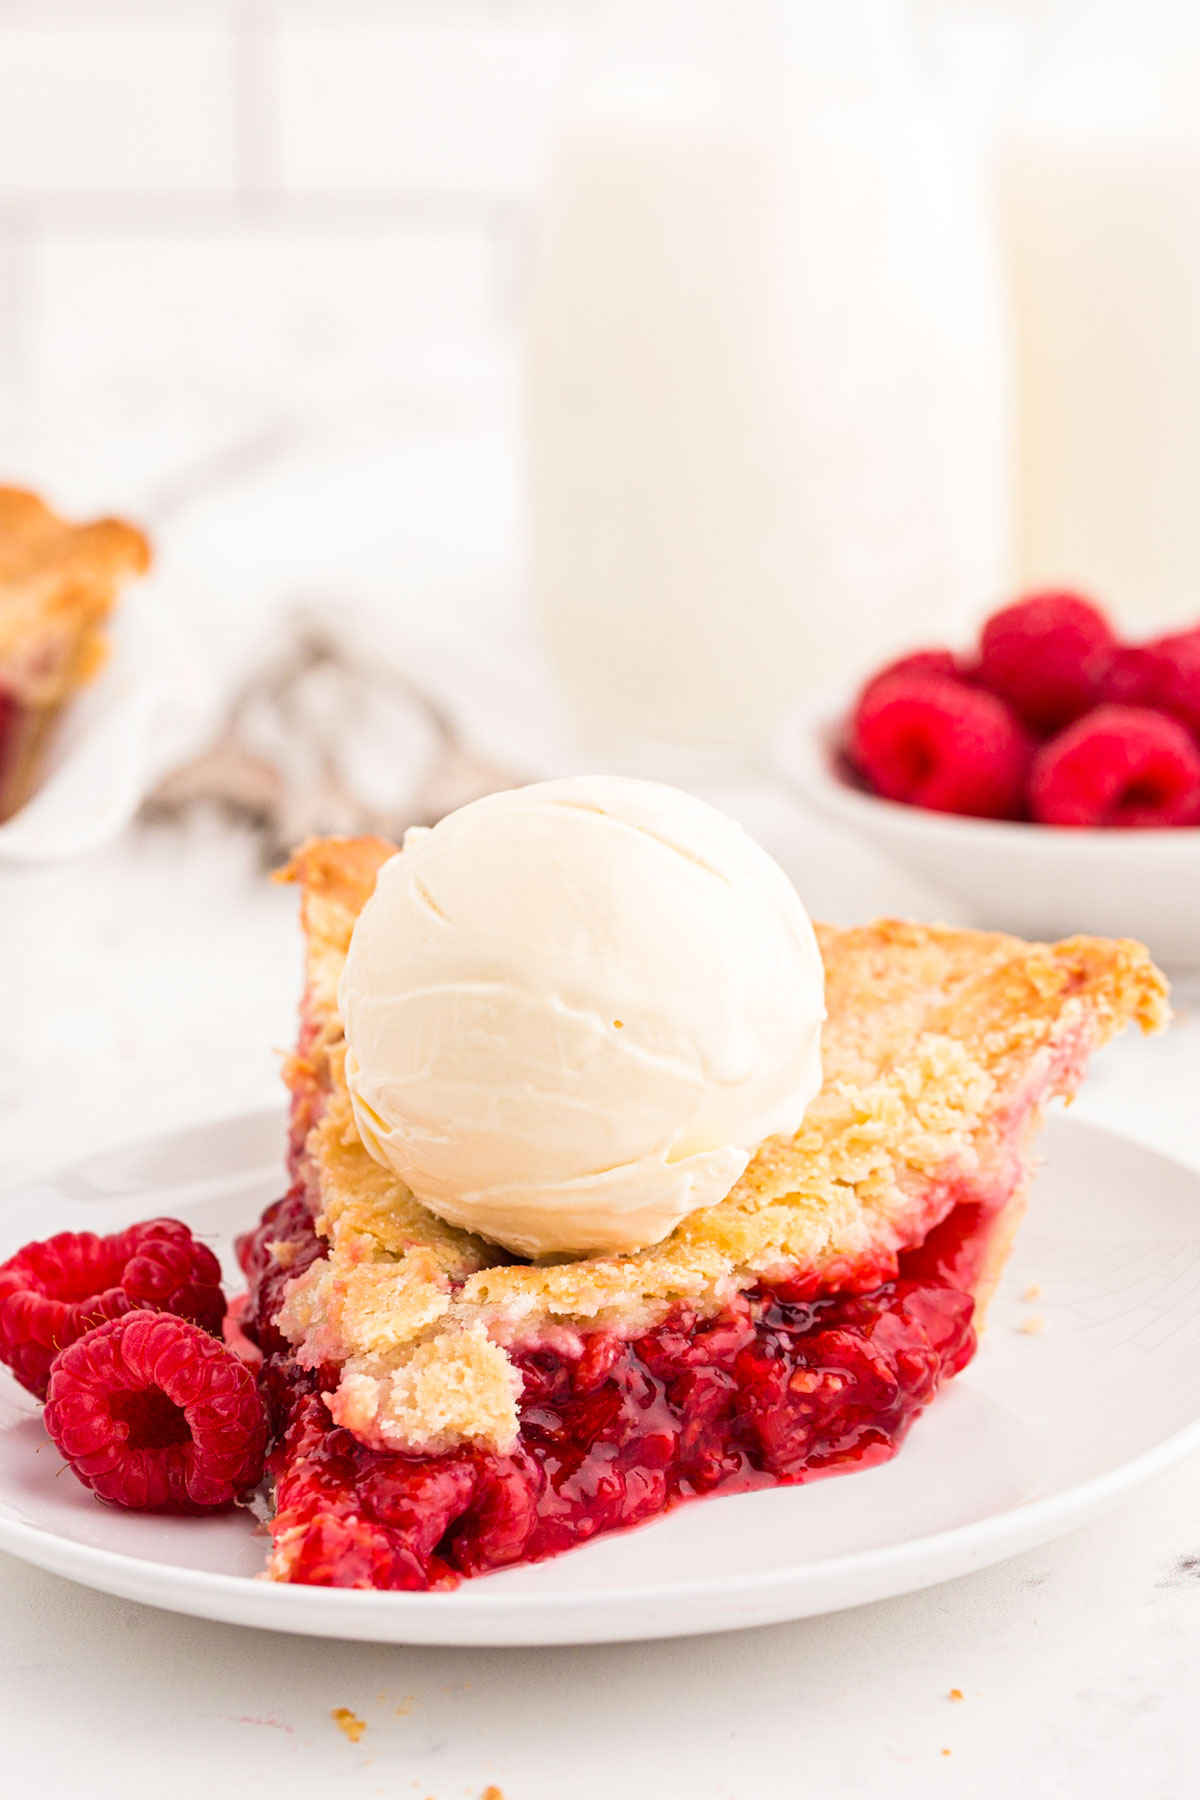 A slice of raspberry pie on a white plate with a scoop of vanilla ice cream on top.